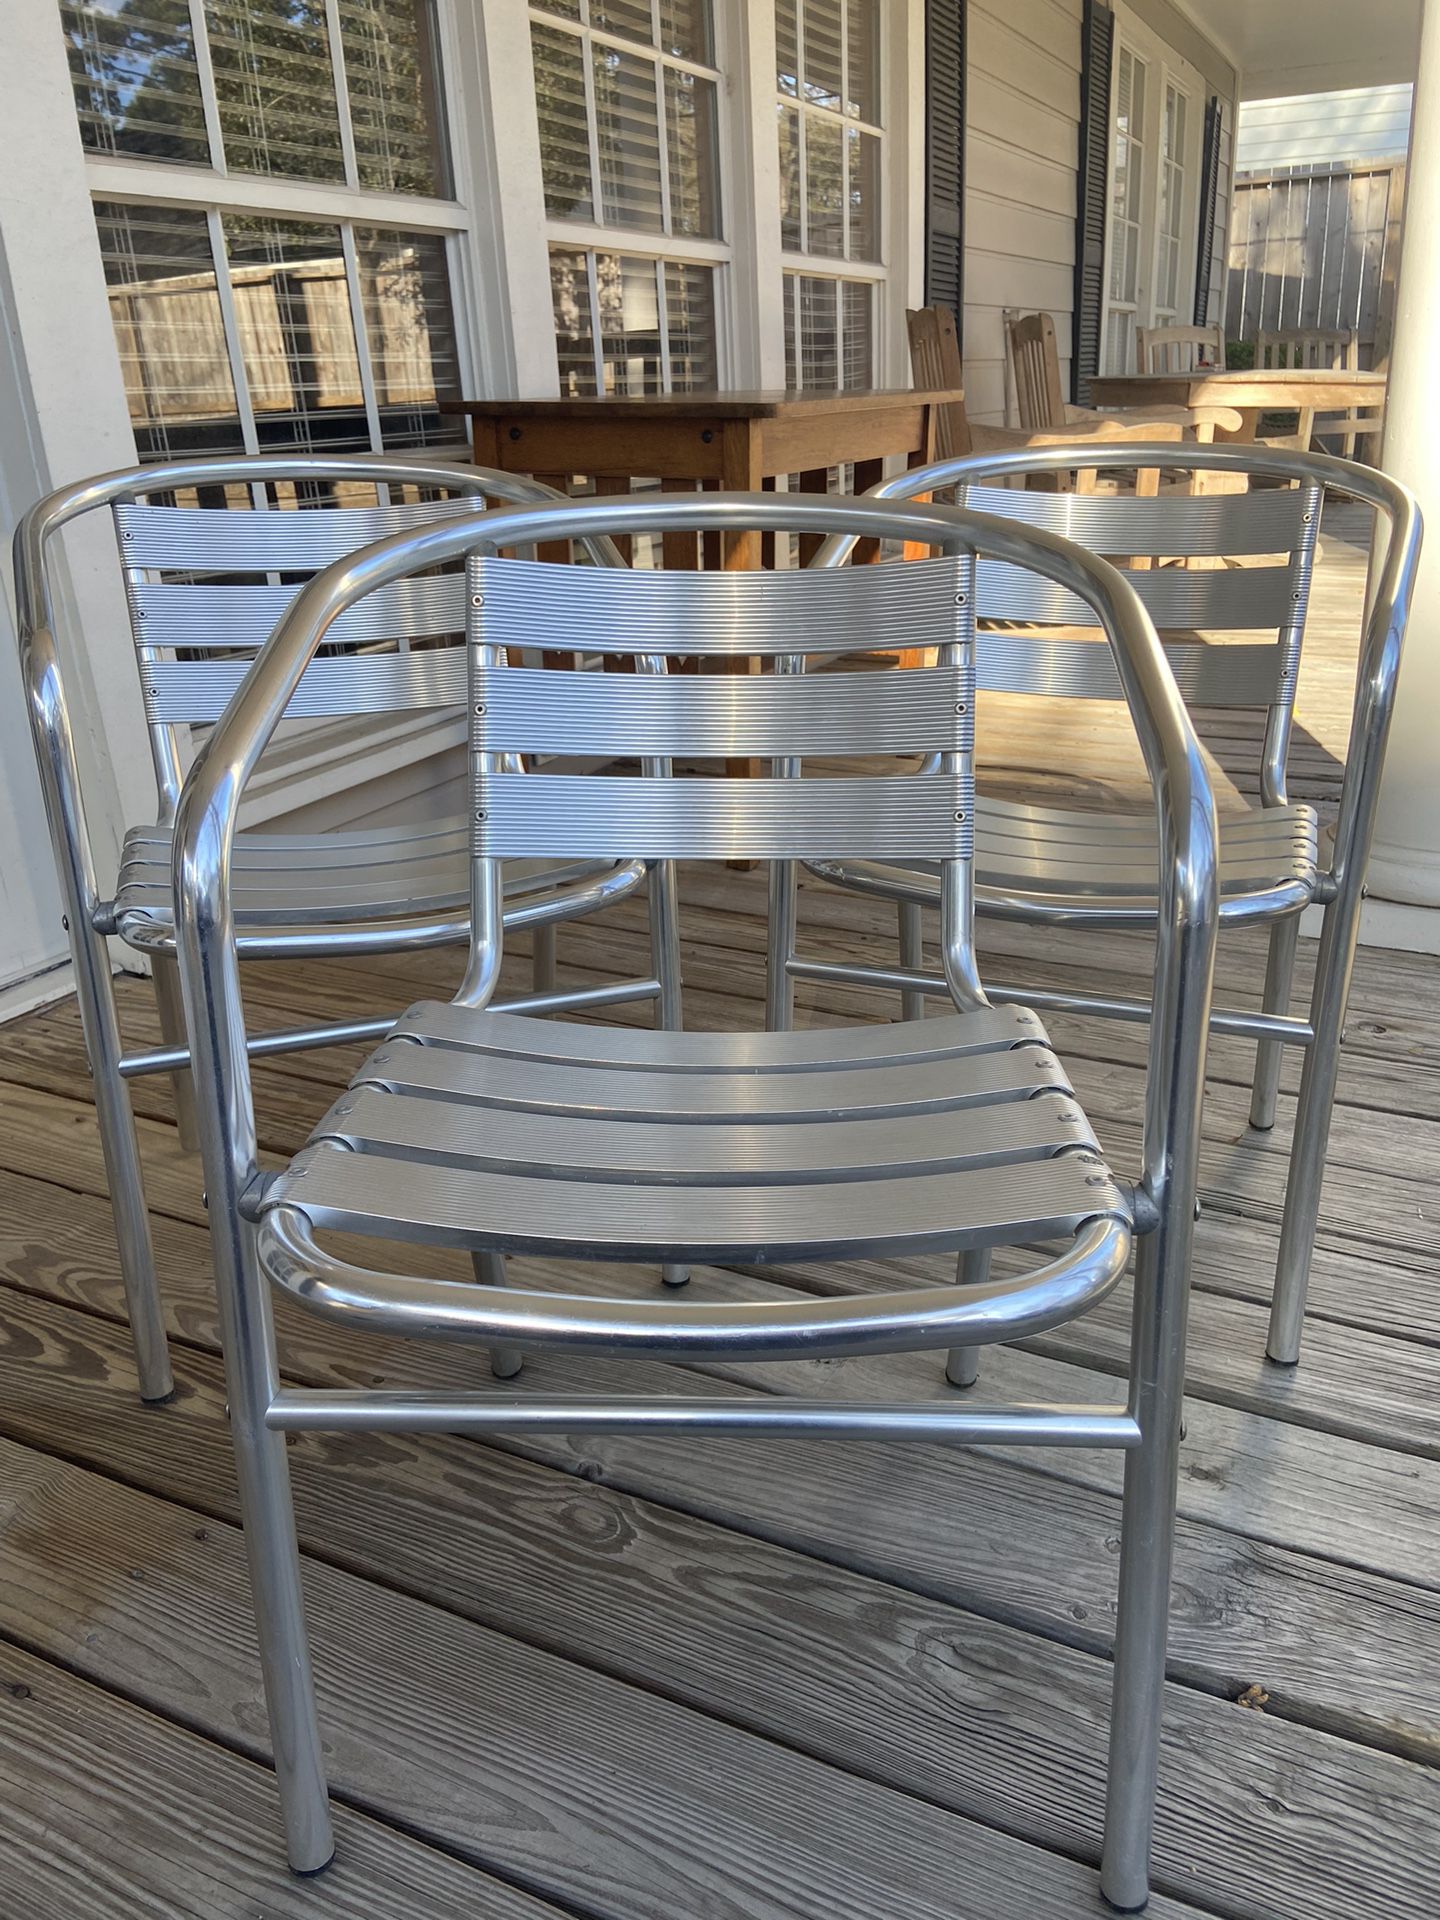 3/Outdoor Slat Back Stack..Aluminum Chairs